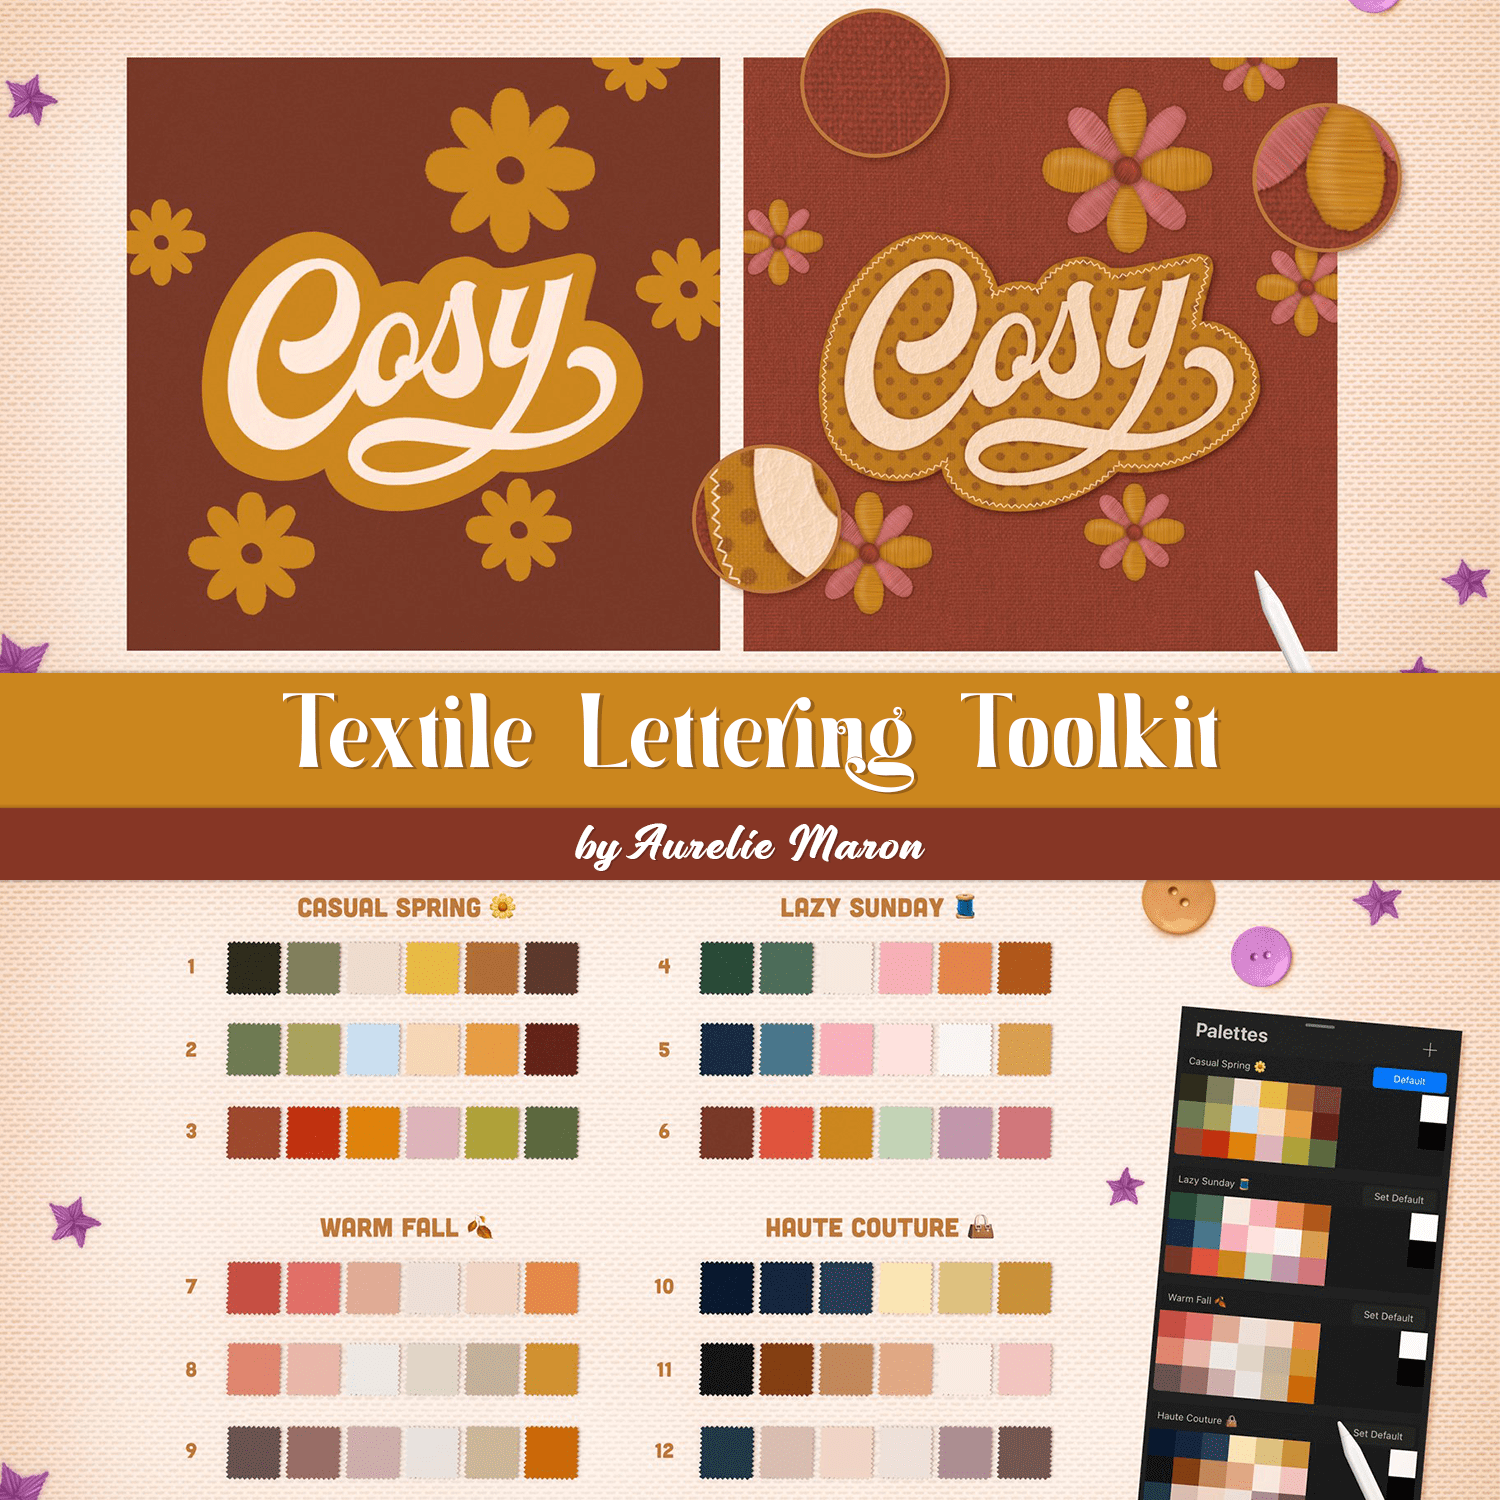 Textile letters with the names of the colors "Casual spring", "Warm fall" and etc.